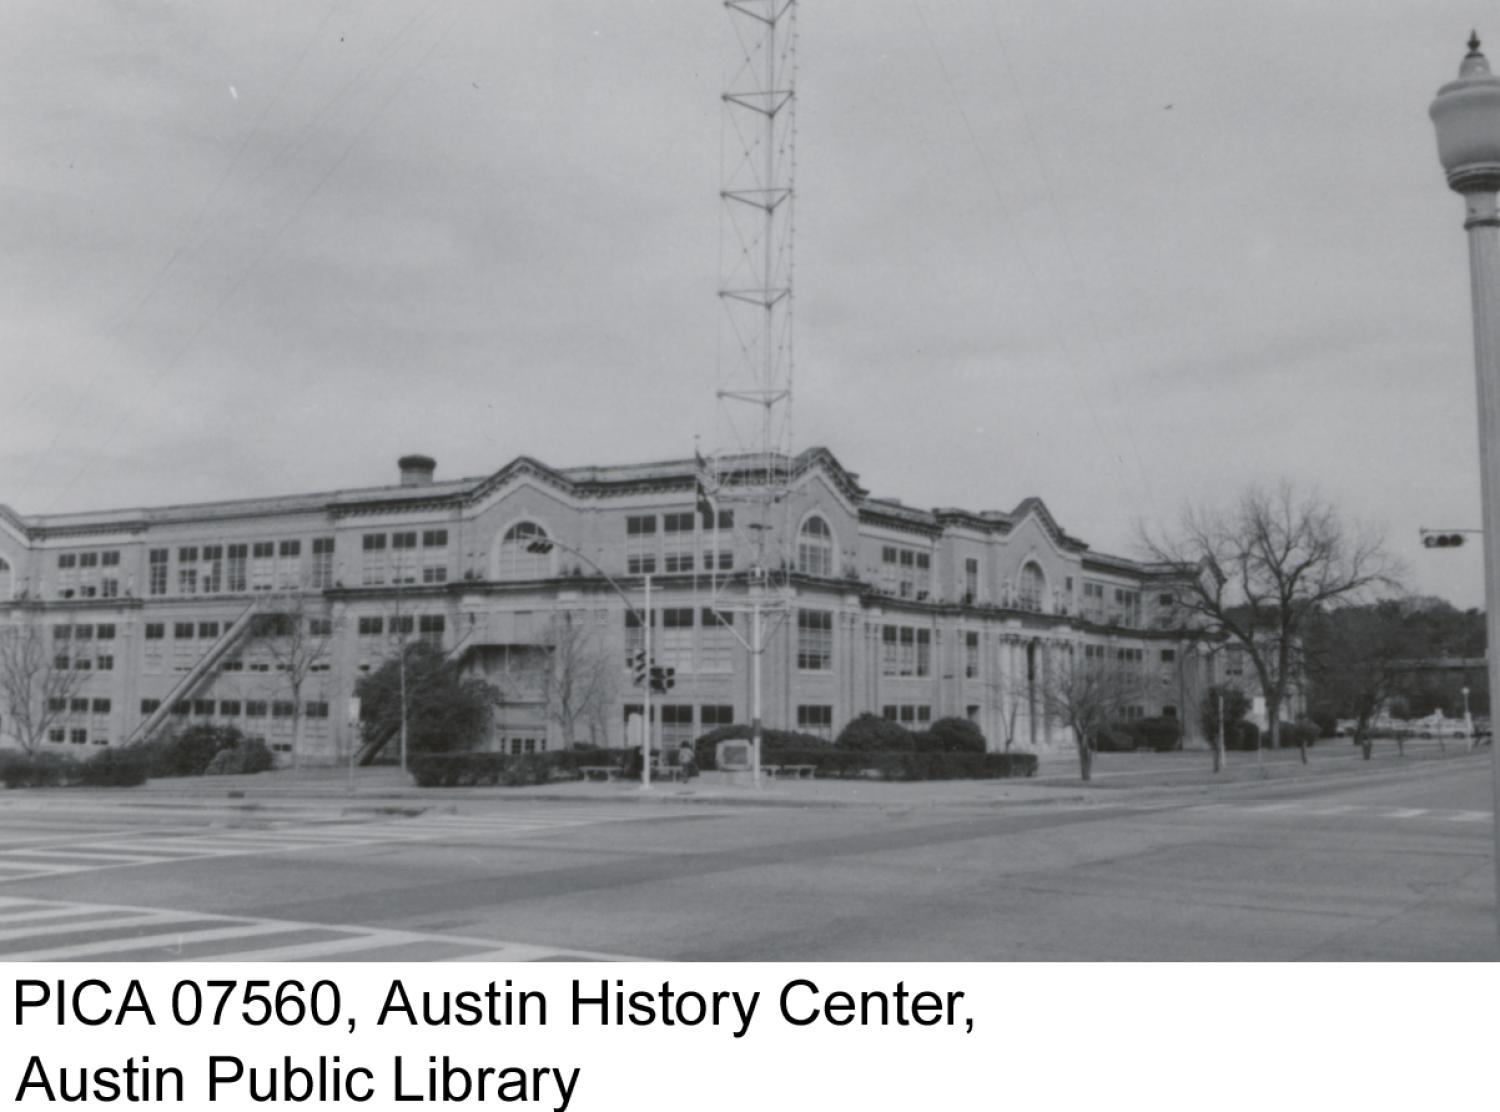 [Exterior Austin High School from the corner of 12th Street and Rio Grande Street]
                                                
                                                    [Sequence #]: 1 of 1
                                                